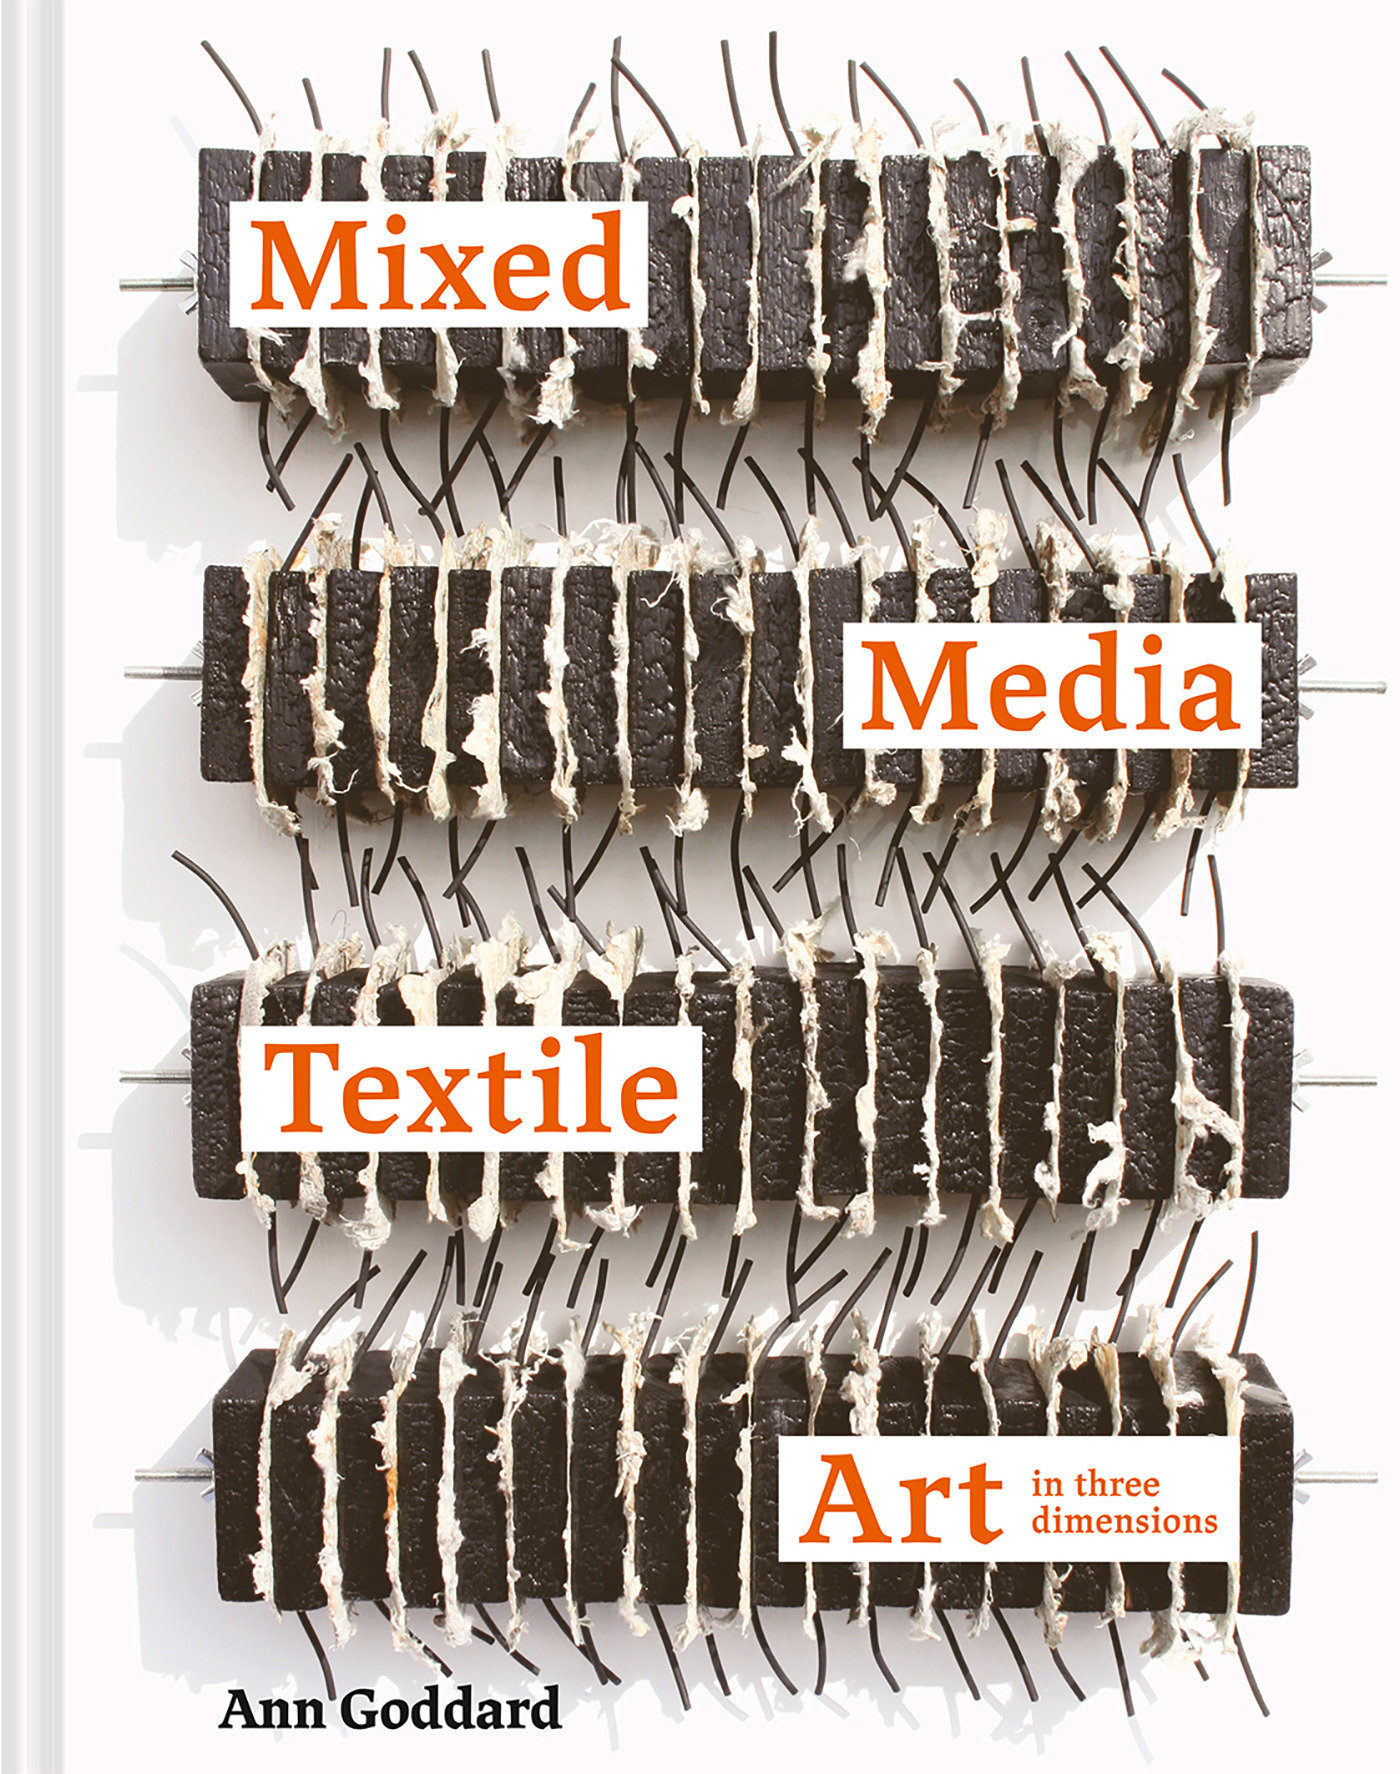 Mixed Media Textile Art In Three Dimensions (Hardcover Book)